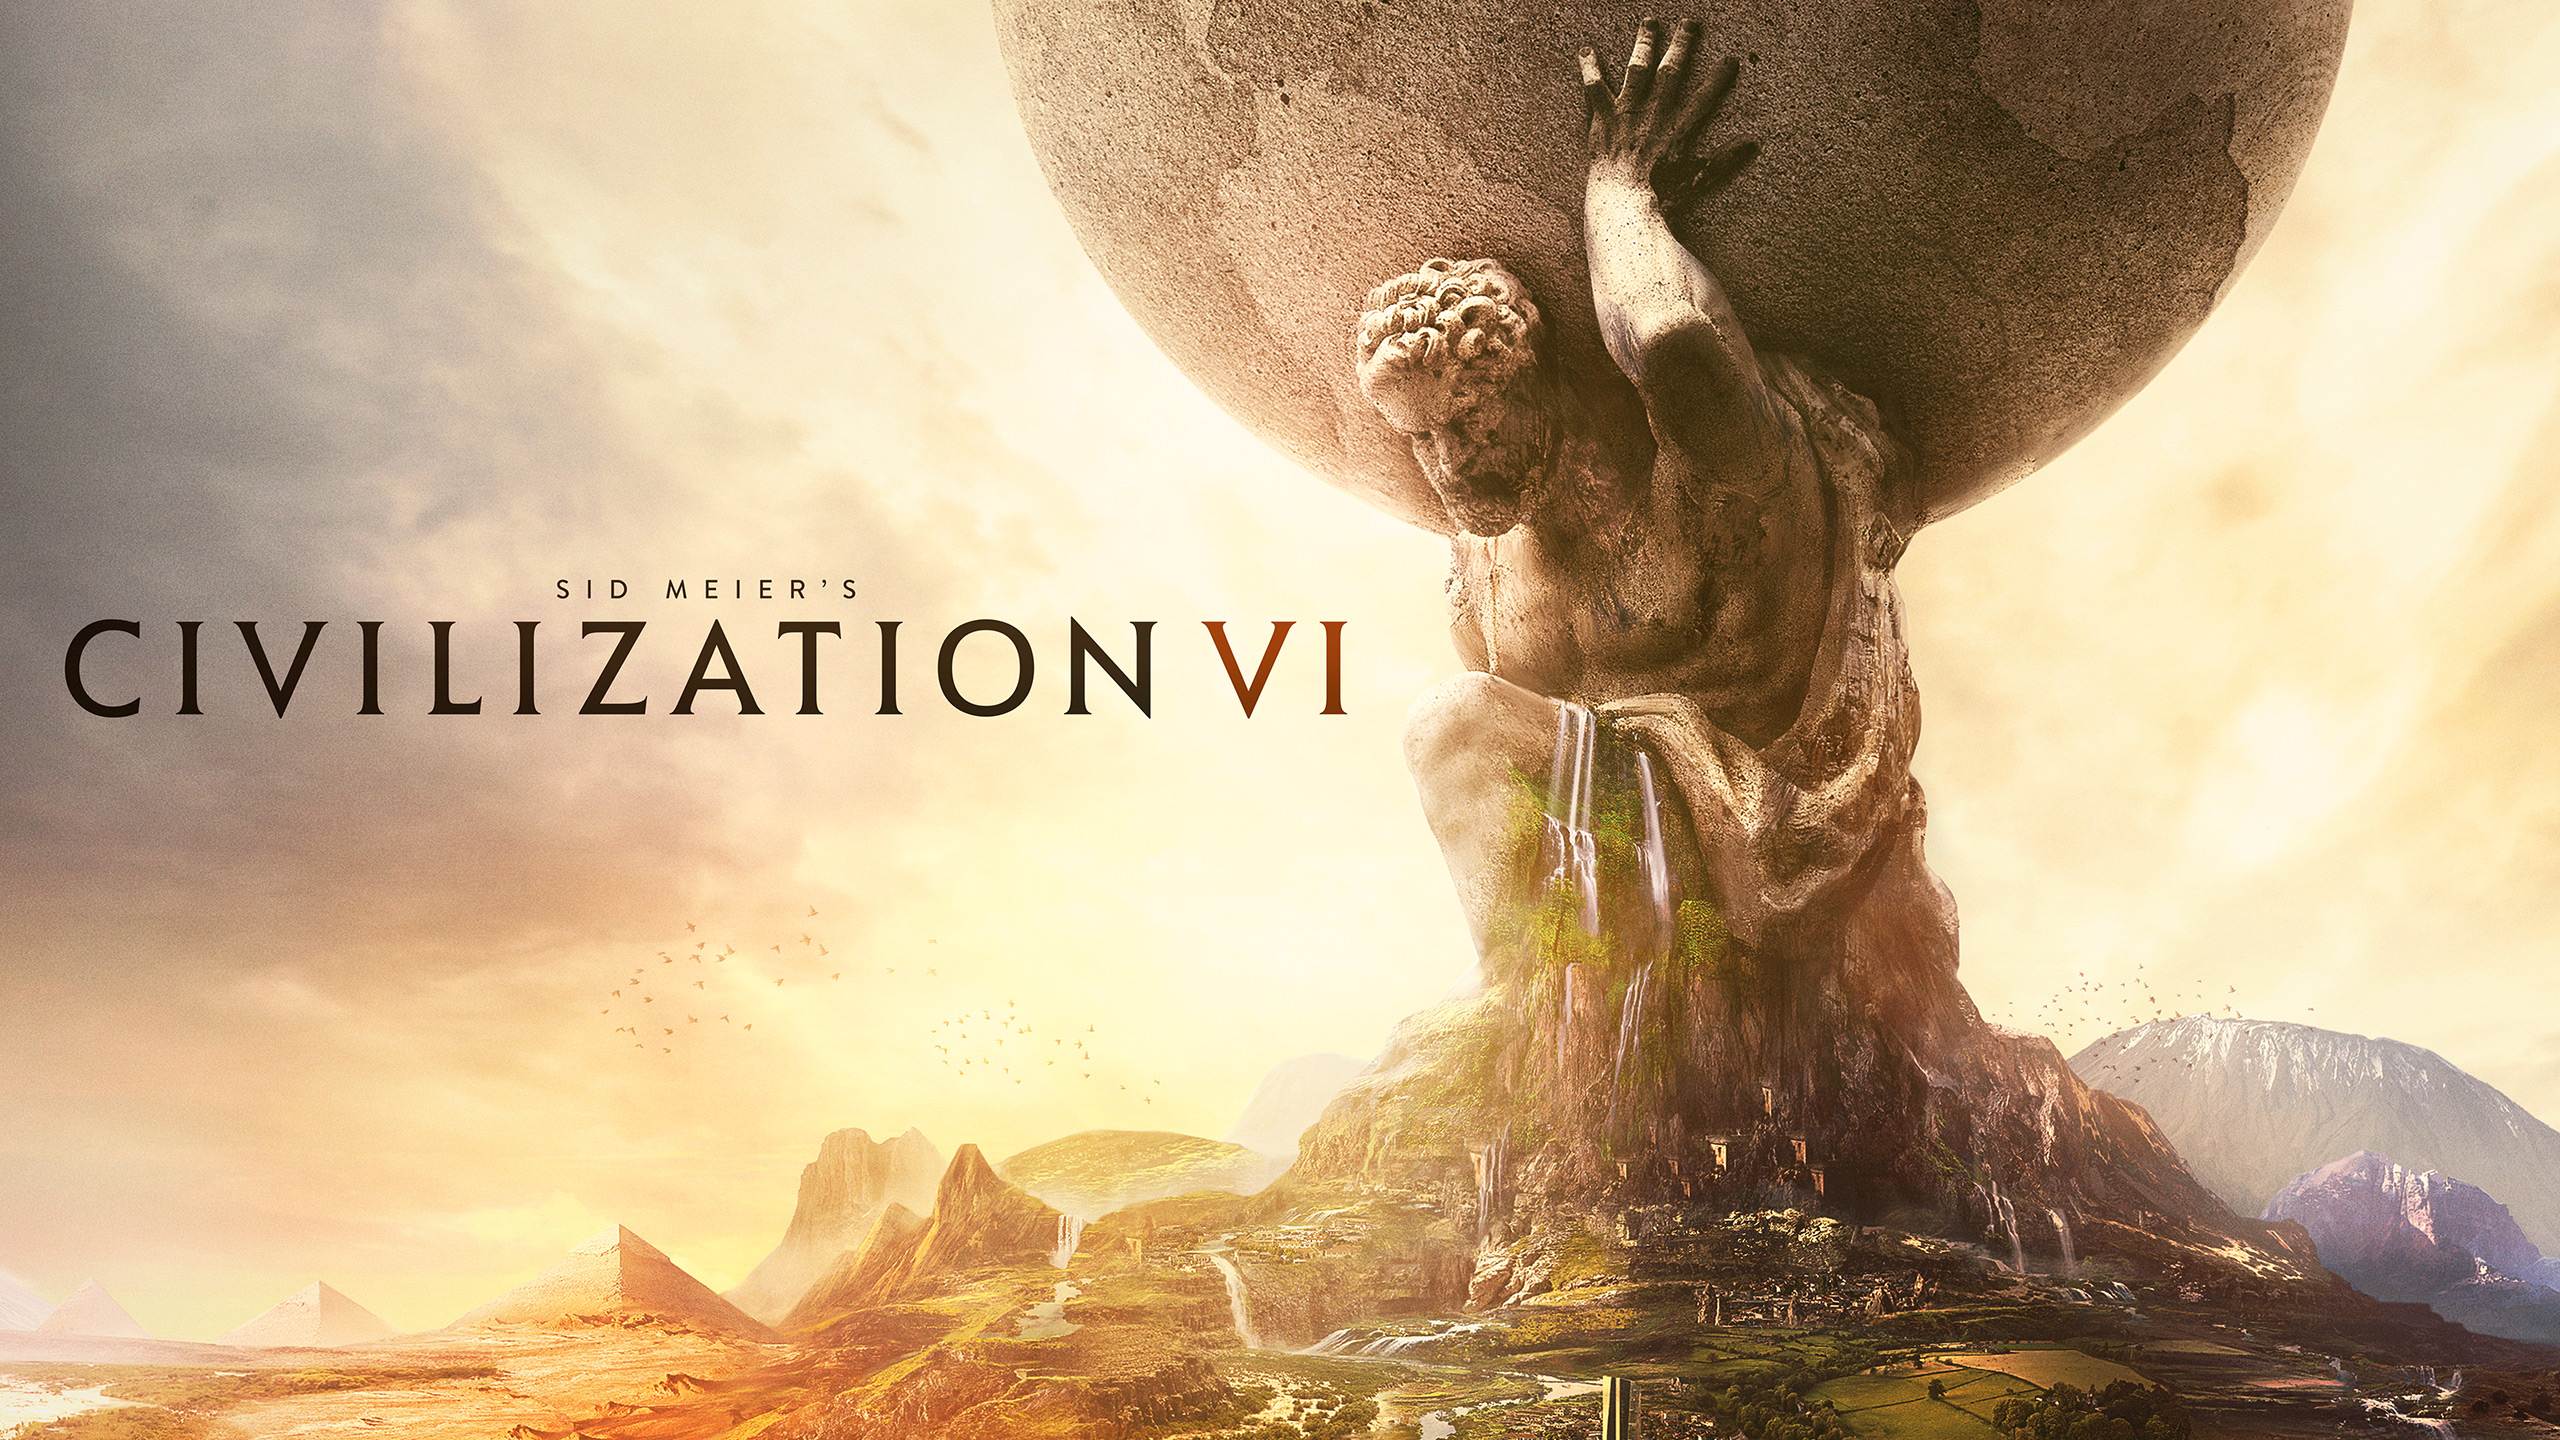 Civilization 6 Is Getting a New Expansion This Week